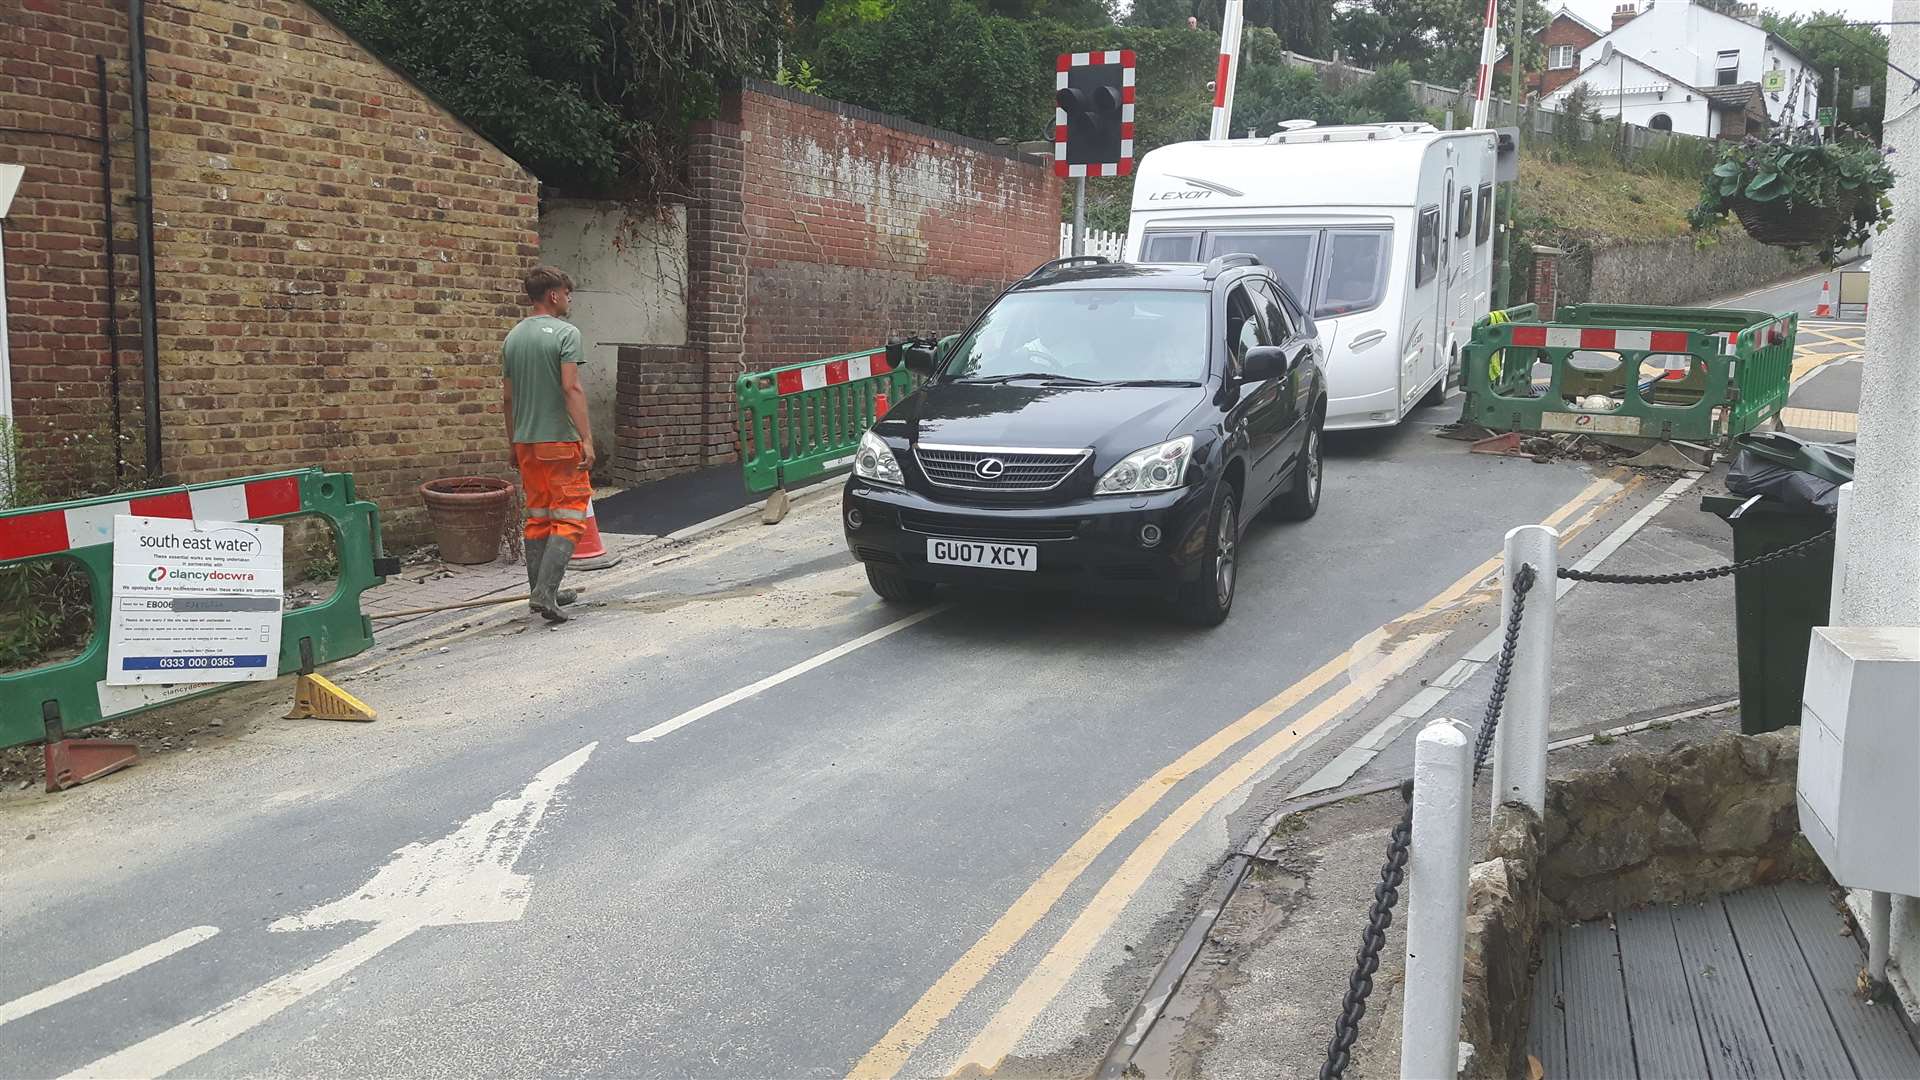 Workmen opened the road to allow this caravan owner to access Riverside Park